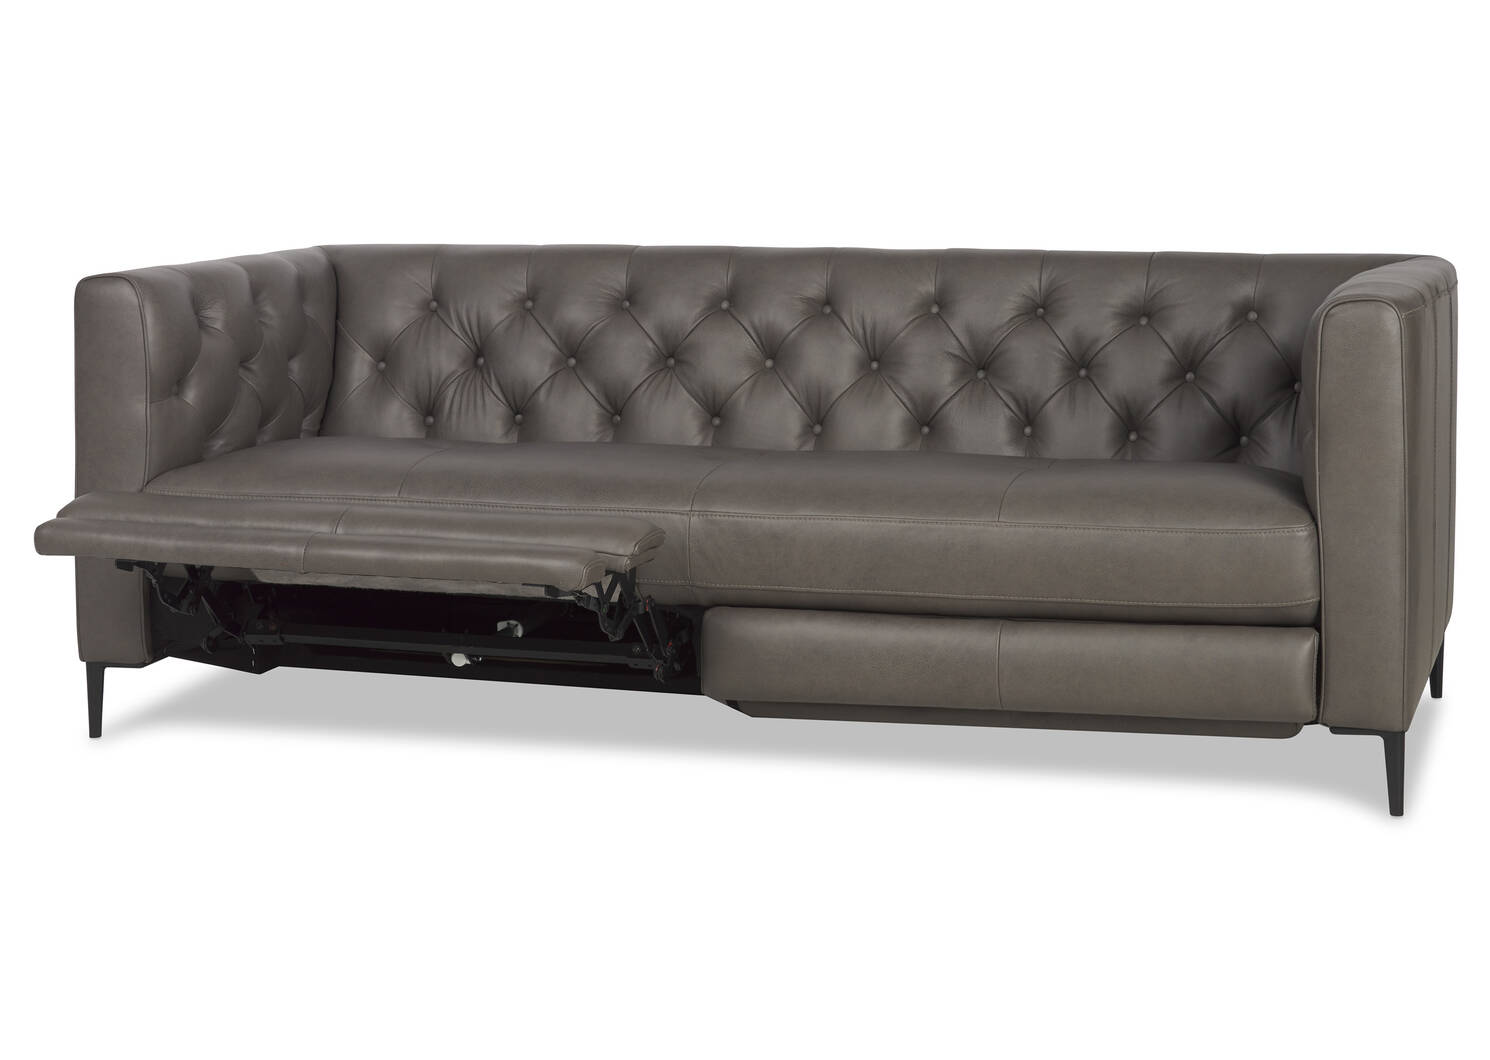 Mckay Leather Relaxer Sofa -Ashby Stone